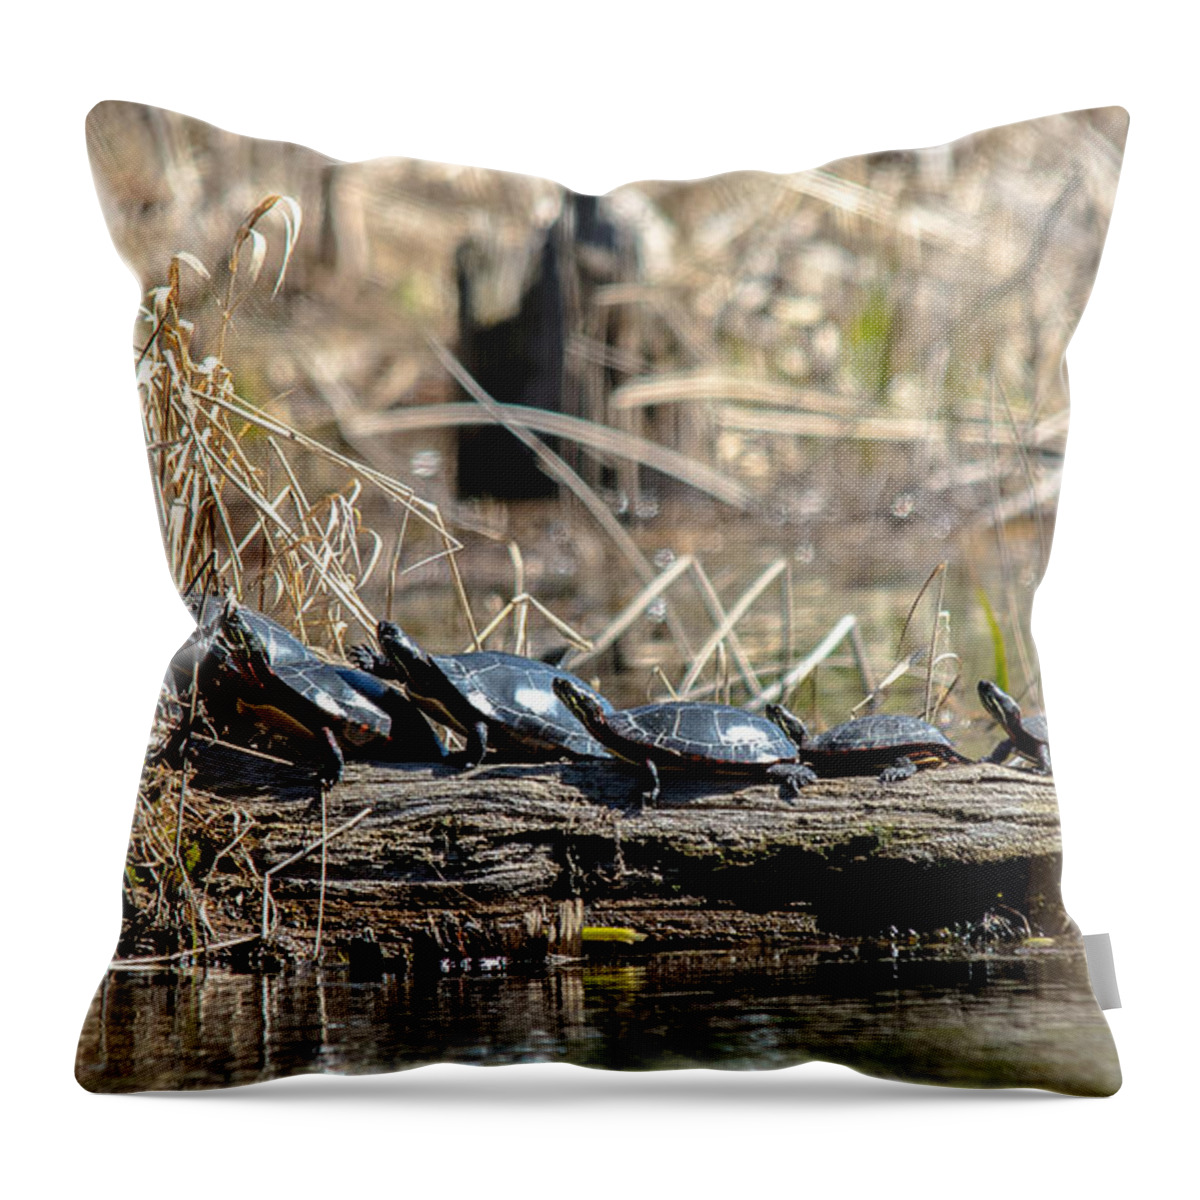 Painted Turtles Throw Pillow featuring the photograph Sunning Turtles by Cheryl Baxter